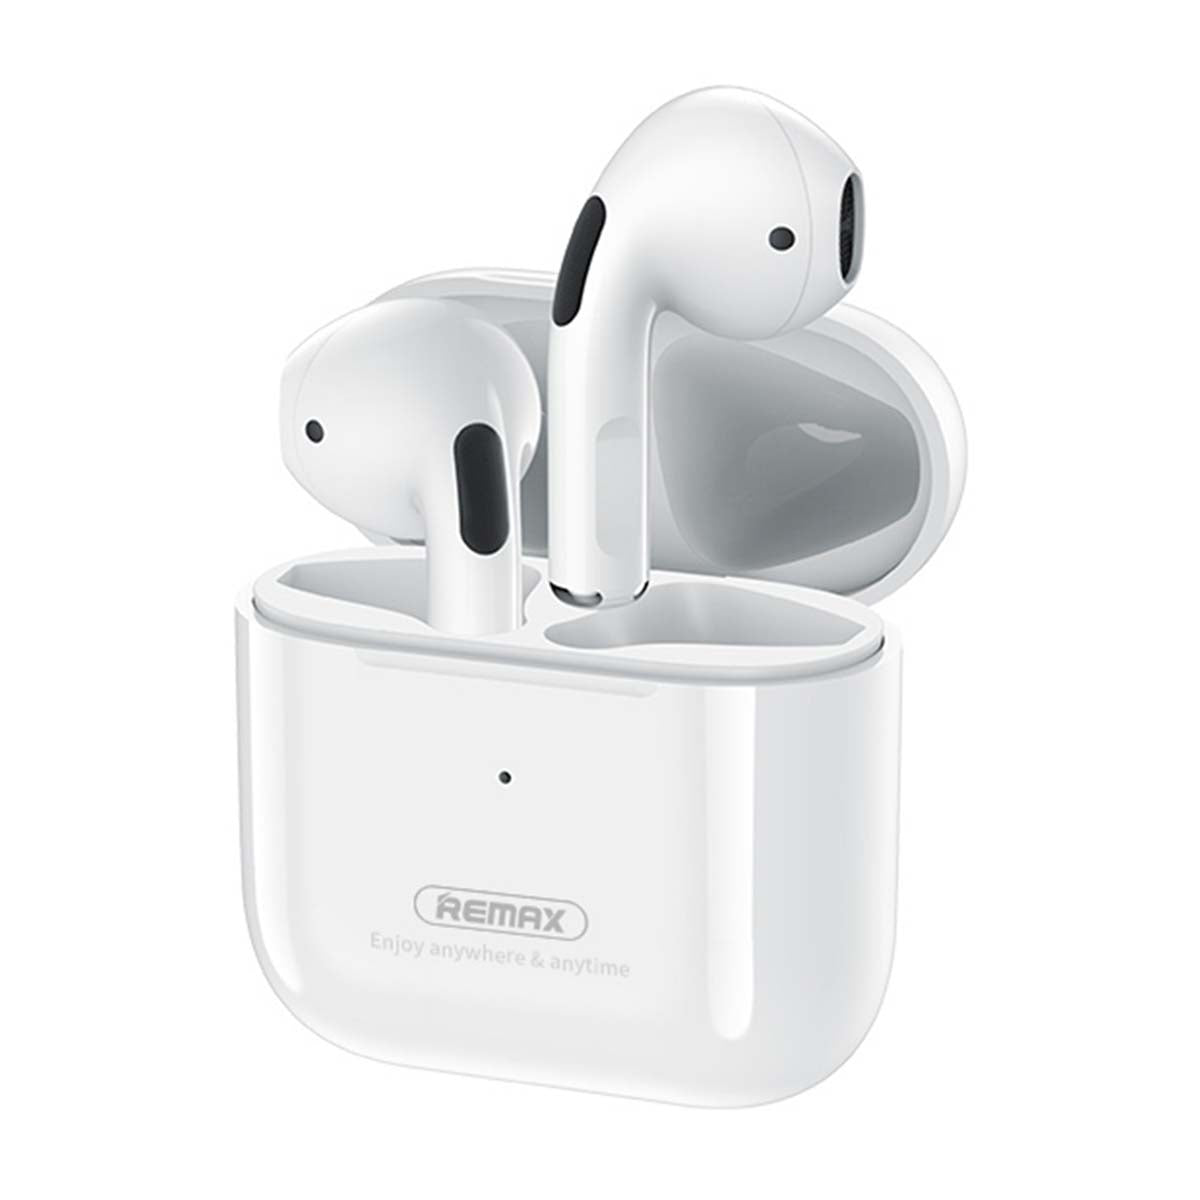 Remax Wireless Stereo Music Earbuds